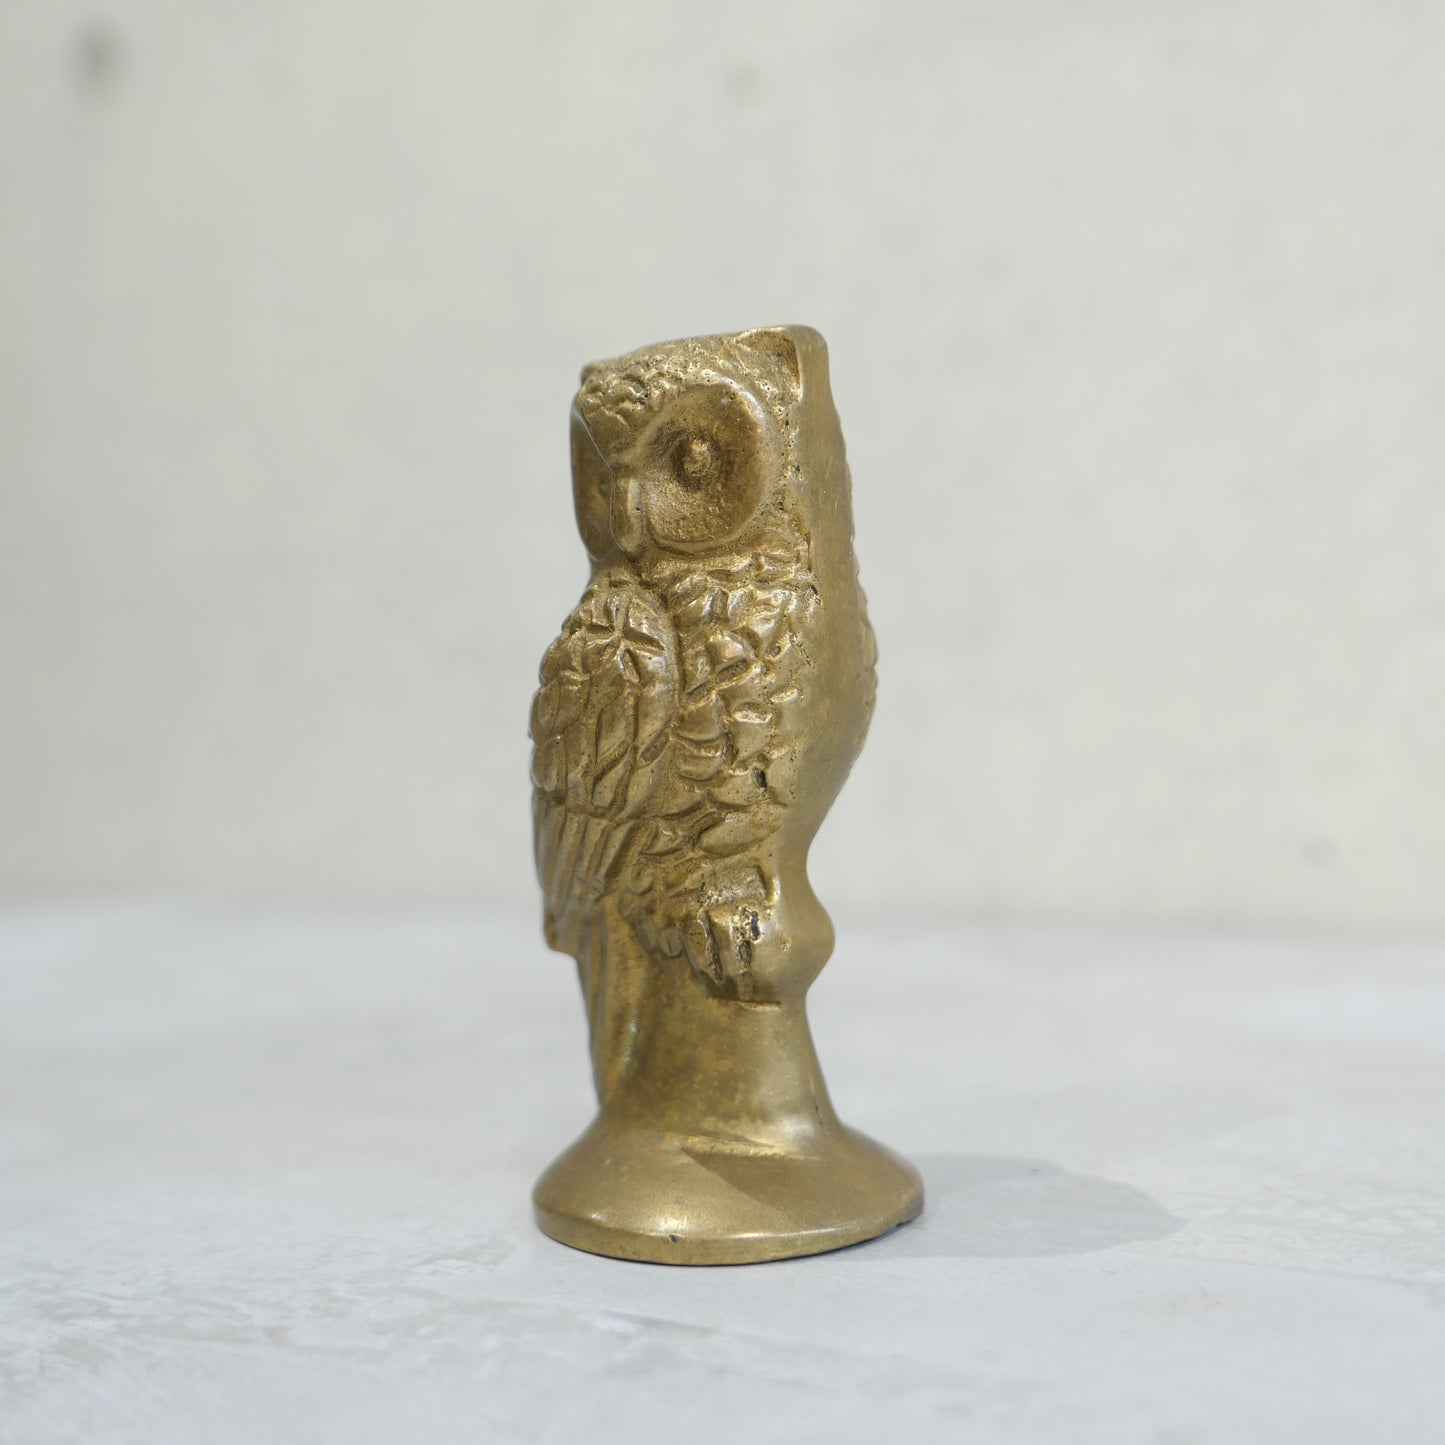 Vintage Owl Ornament or Paperweight 1950s